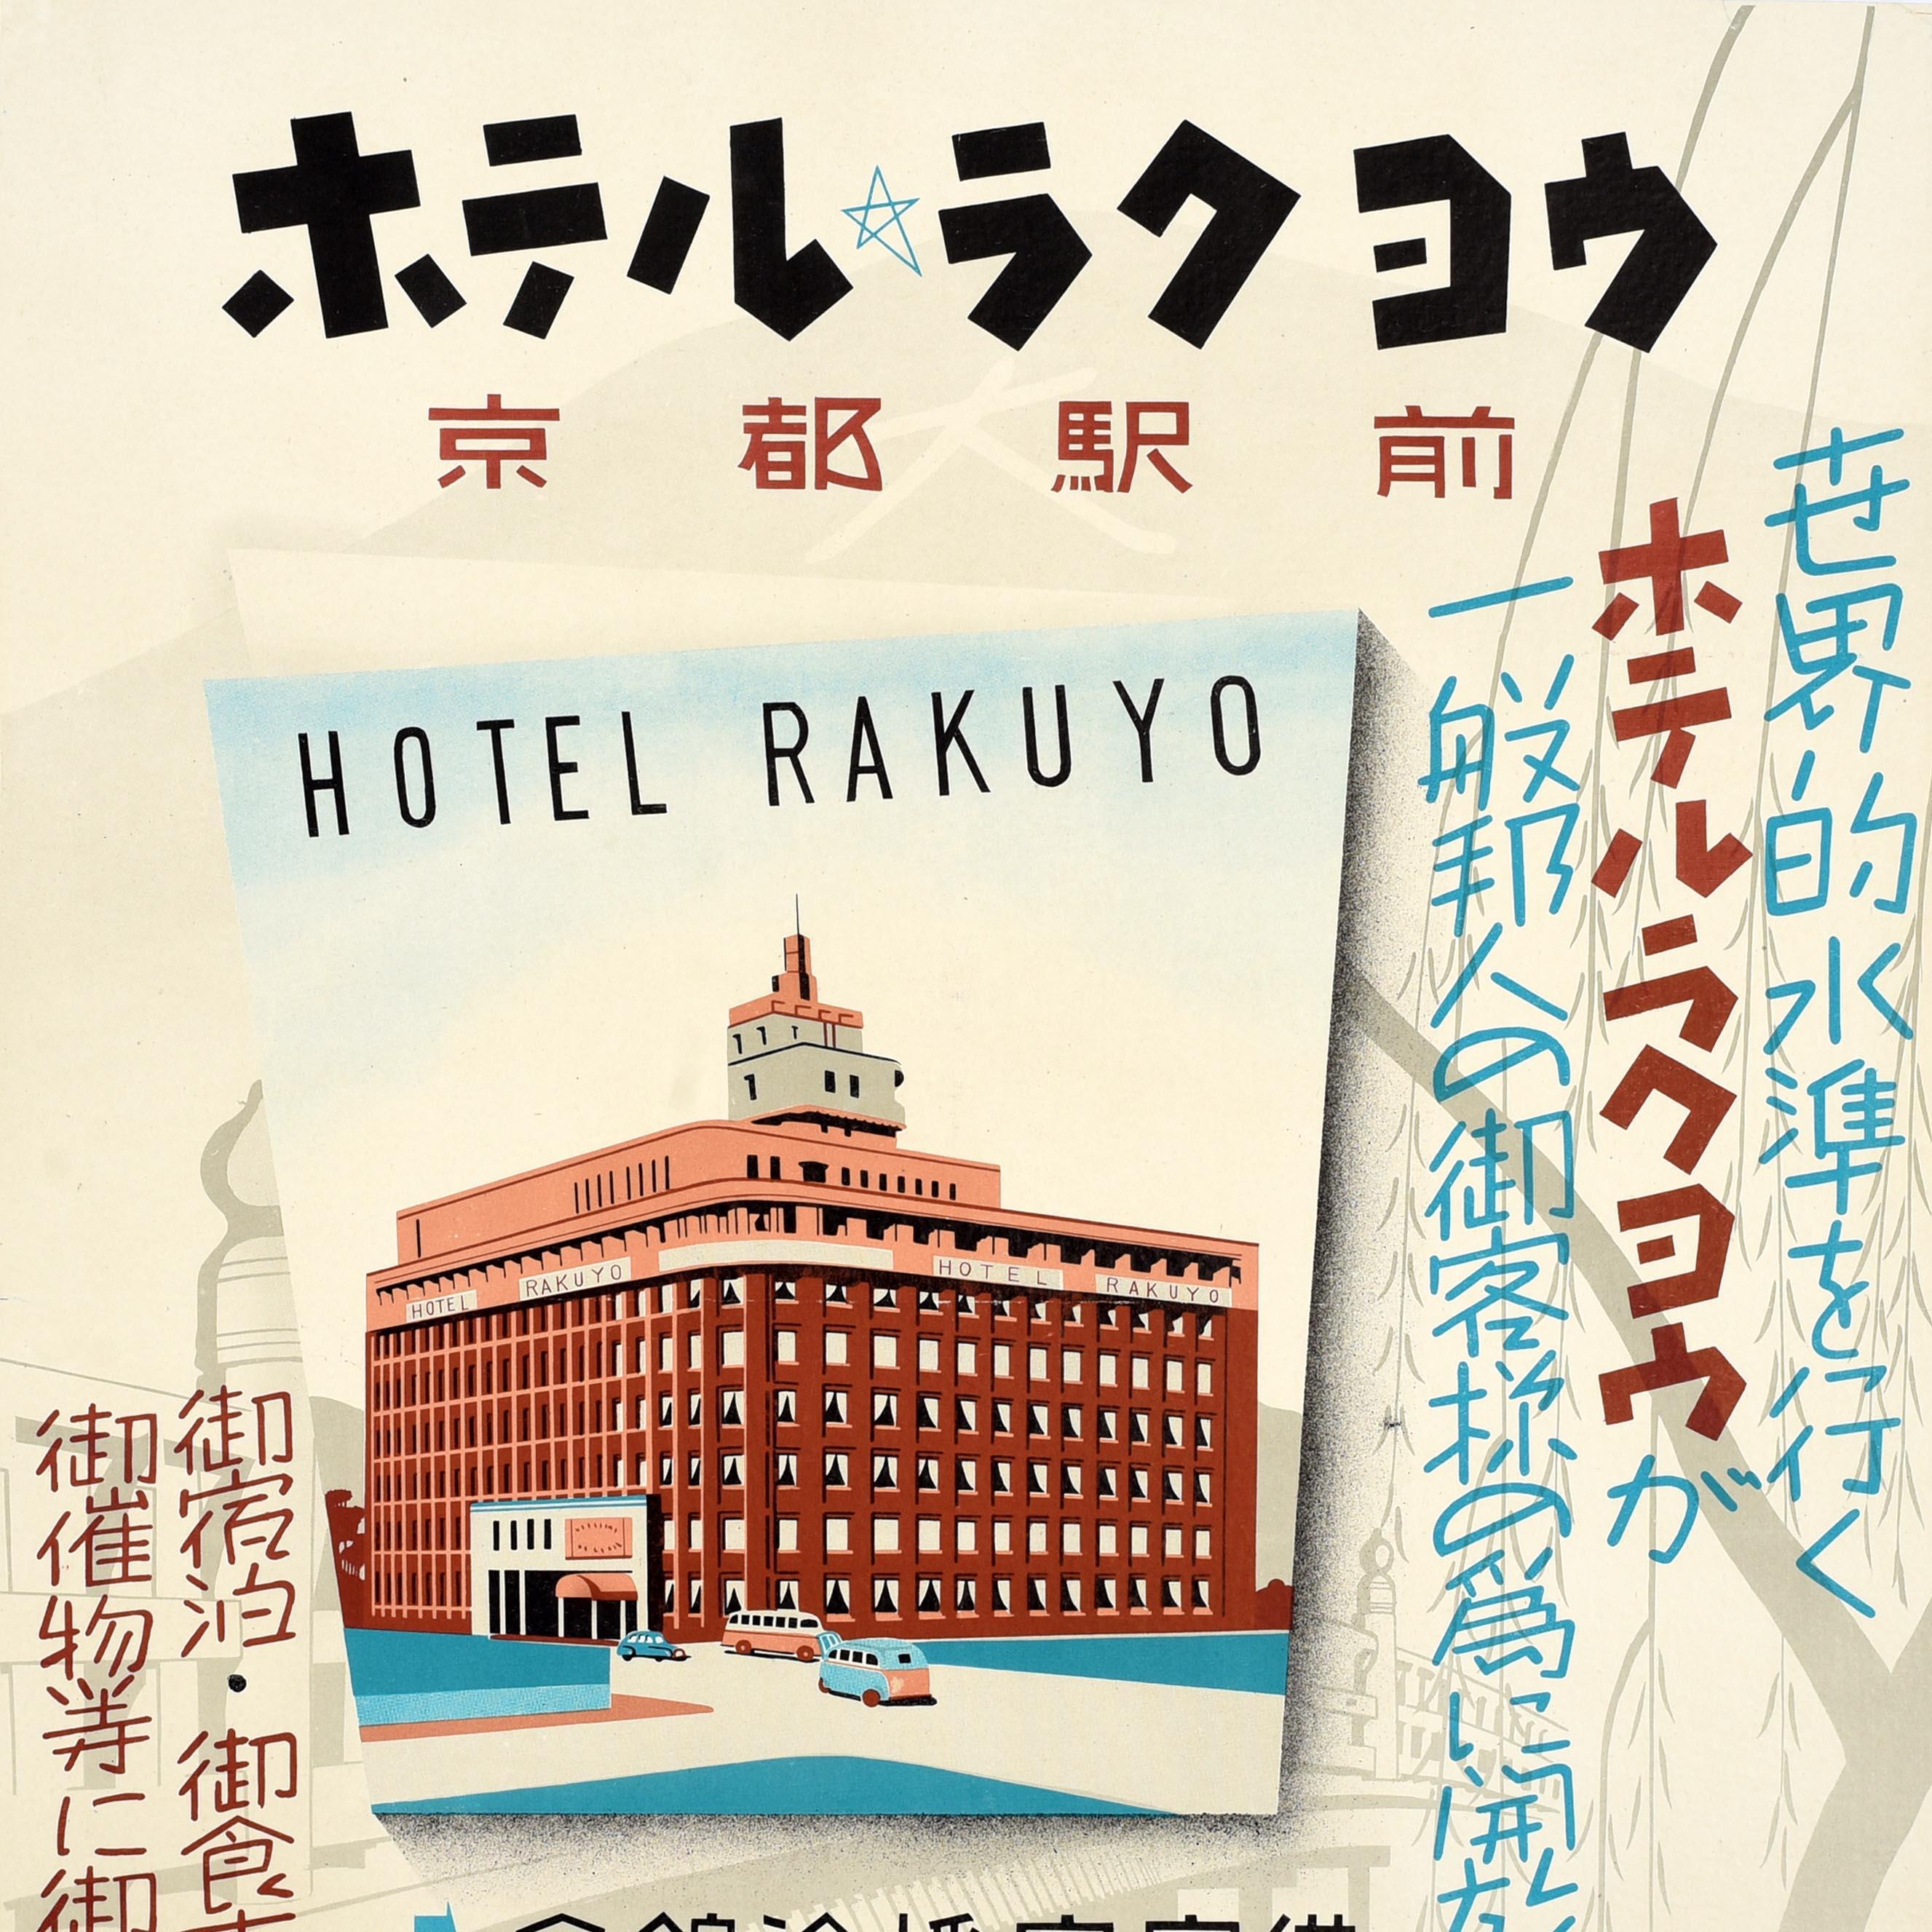 Original vintage travel poster advertising Hotel Rakuyo In front of Kyoto Station featuring an illustration of the hotel with cars and buses parked outside, the bold title text and information in Japanese around the image with details that the hotel